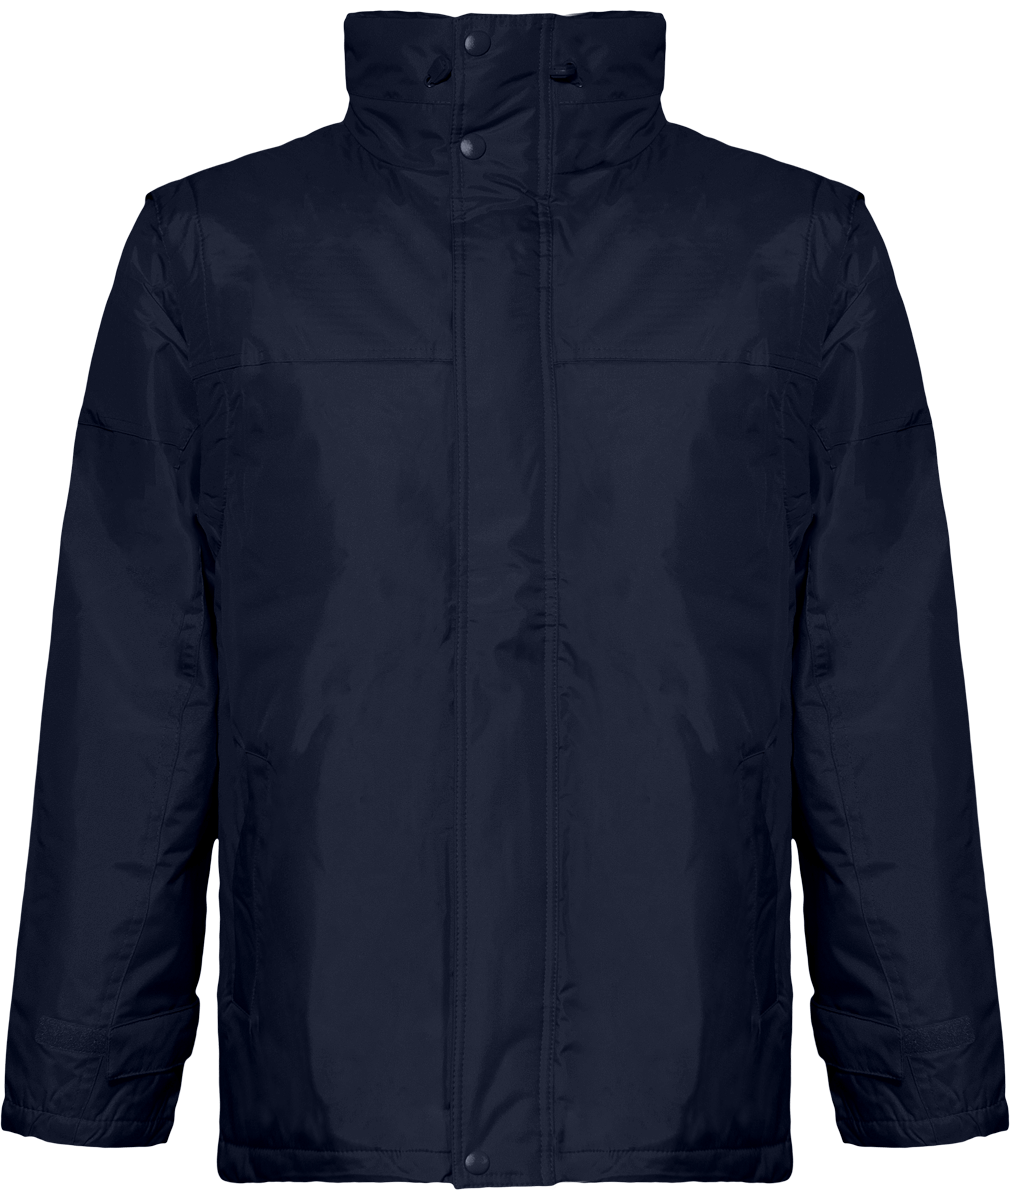 Customizable Premium Quality Jacket With Removable Sleeves Navy